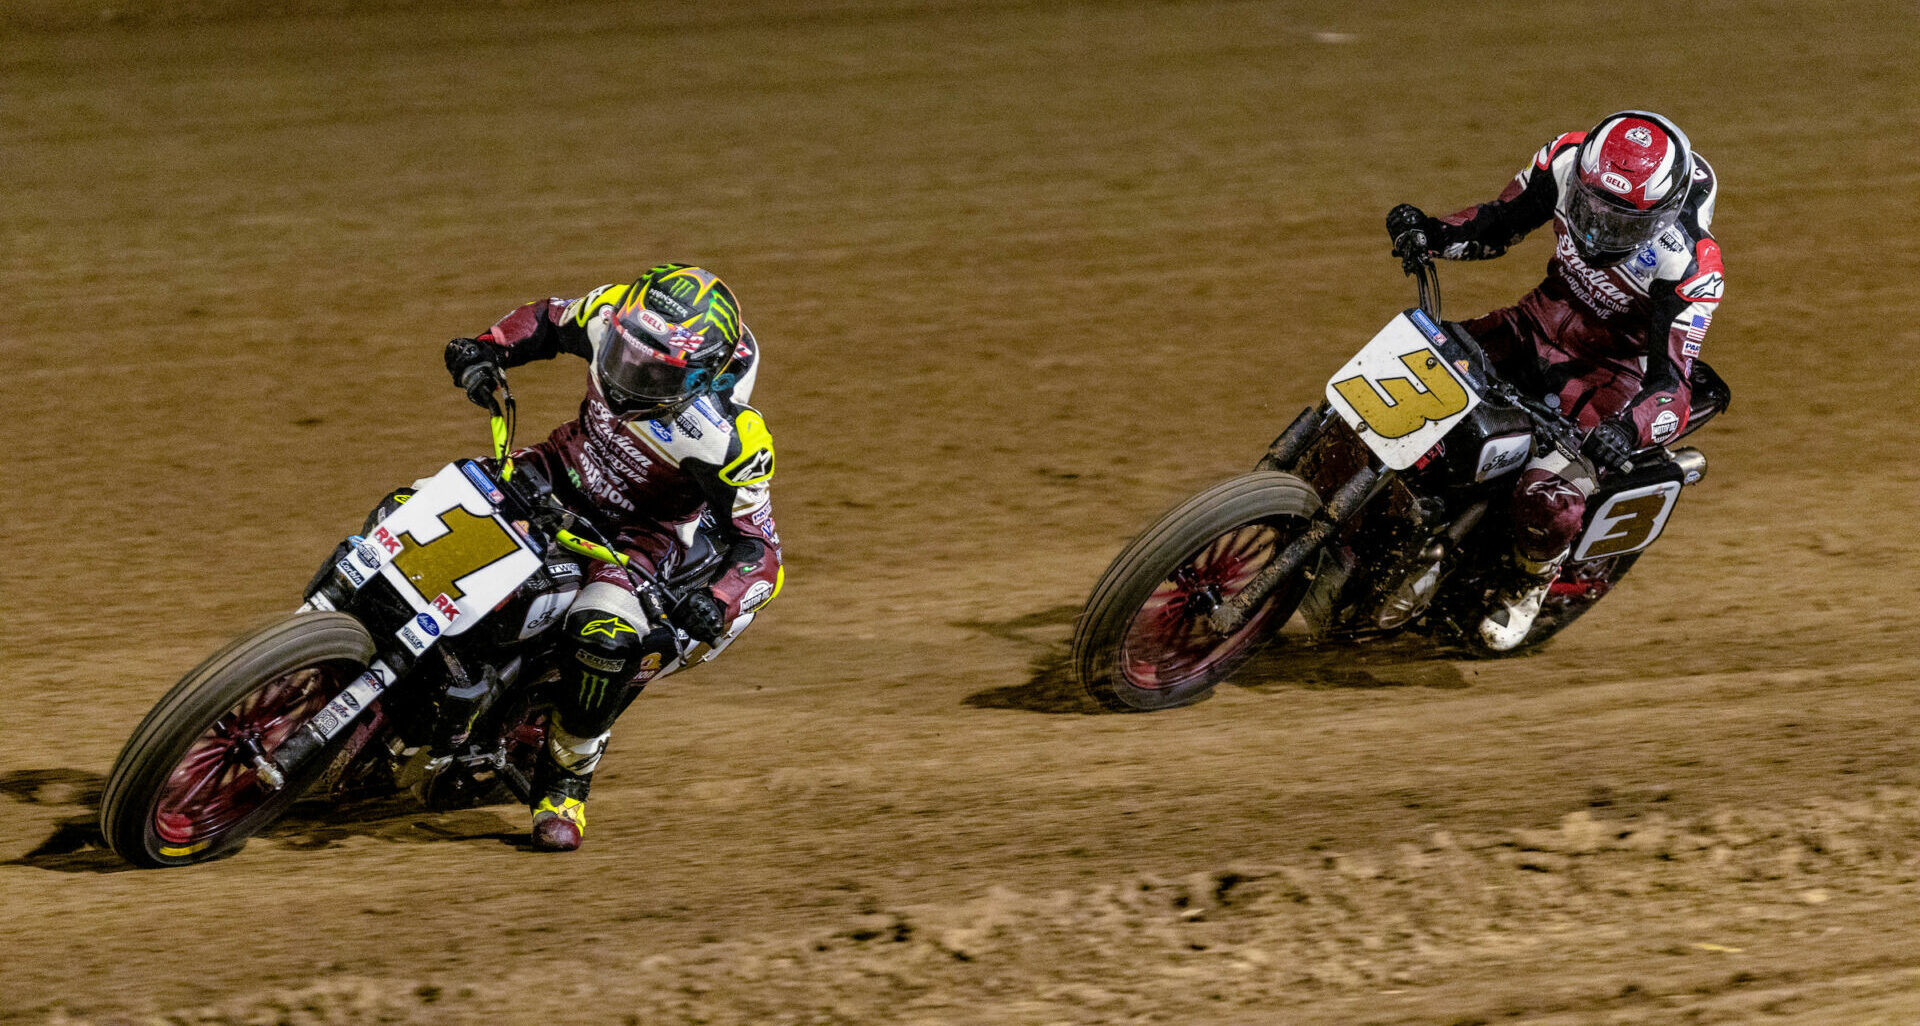 Jared Mees (1) and his Progressive Insurance Indian teammate Briar Bauman (3) in action at the I-70 Half-Mile. Photo courtesy Indian Motorcycle.